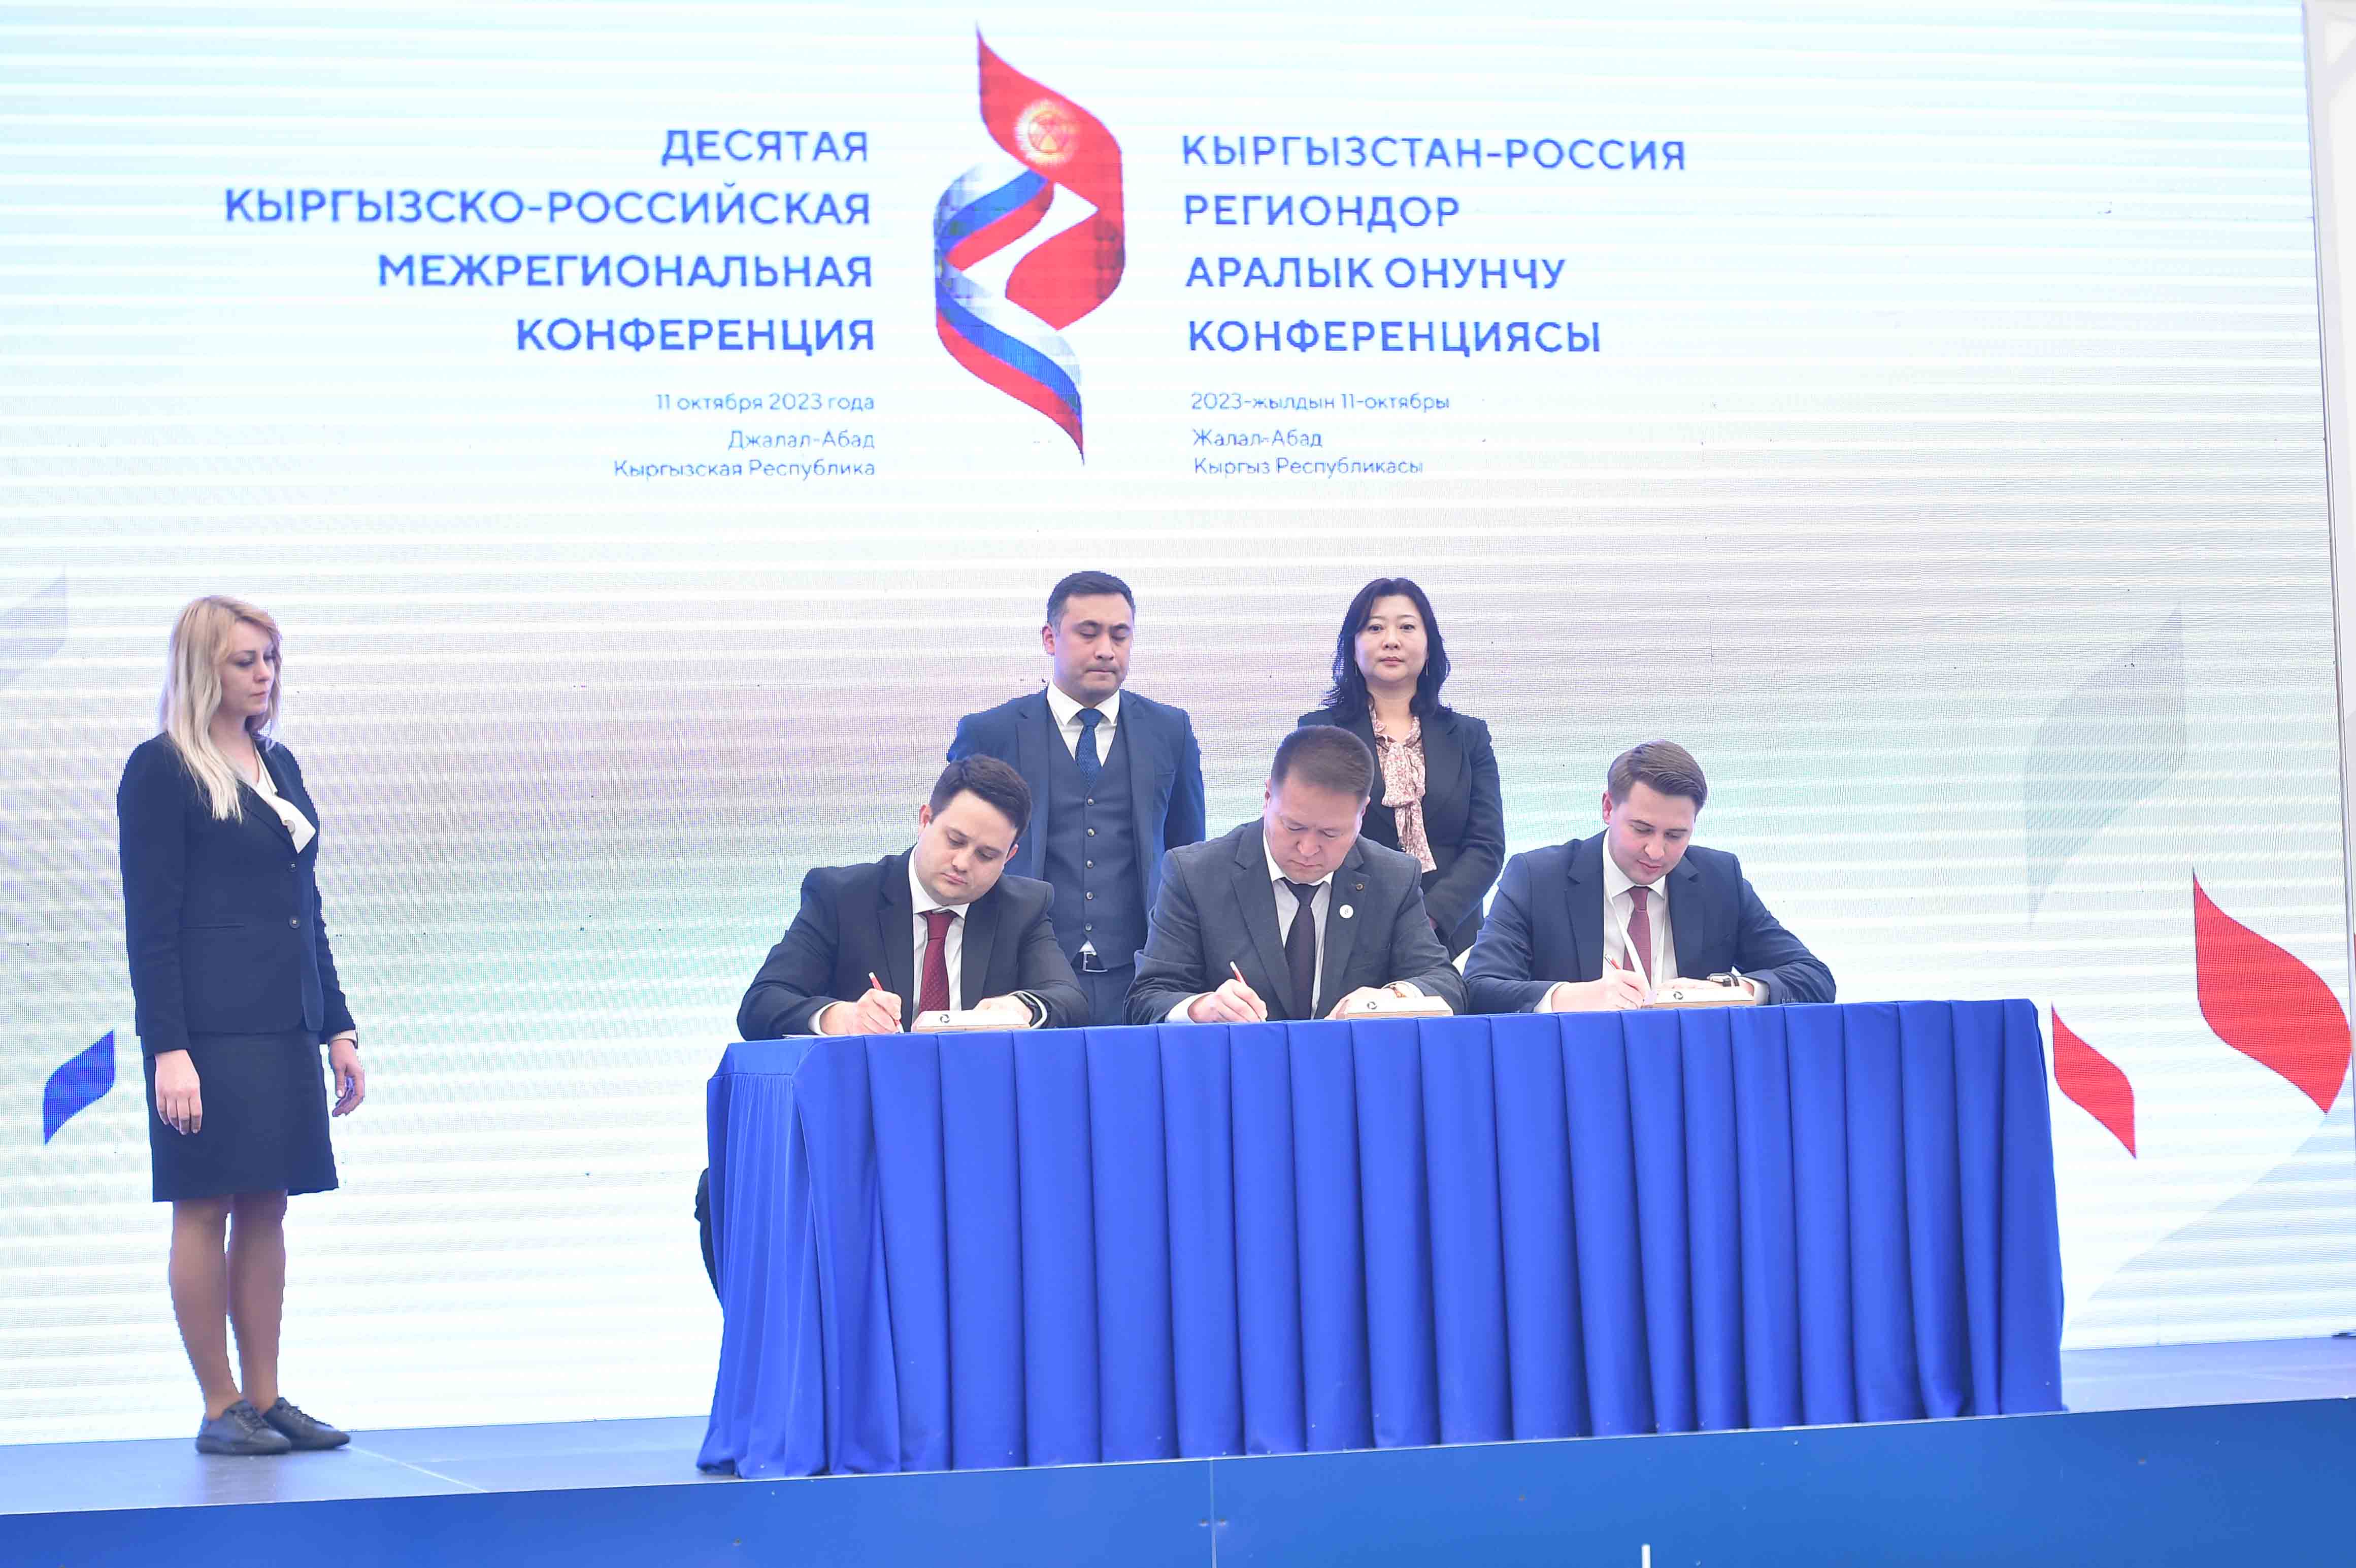 10th-anniversary Kyrgyz-Russian conference yields $3.5bn in economic agreements, strengthening bilateral ties 